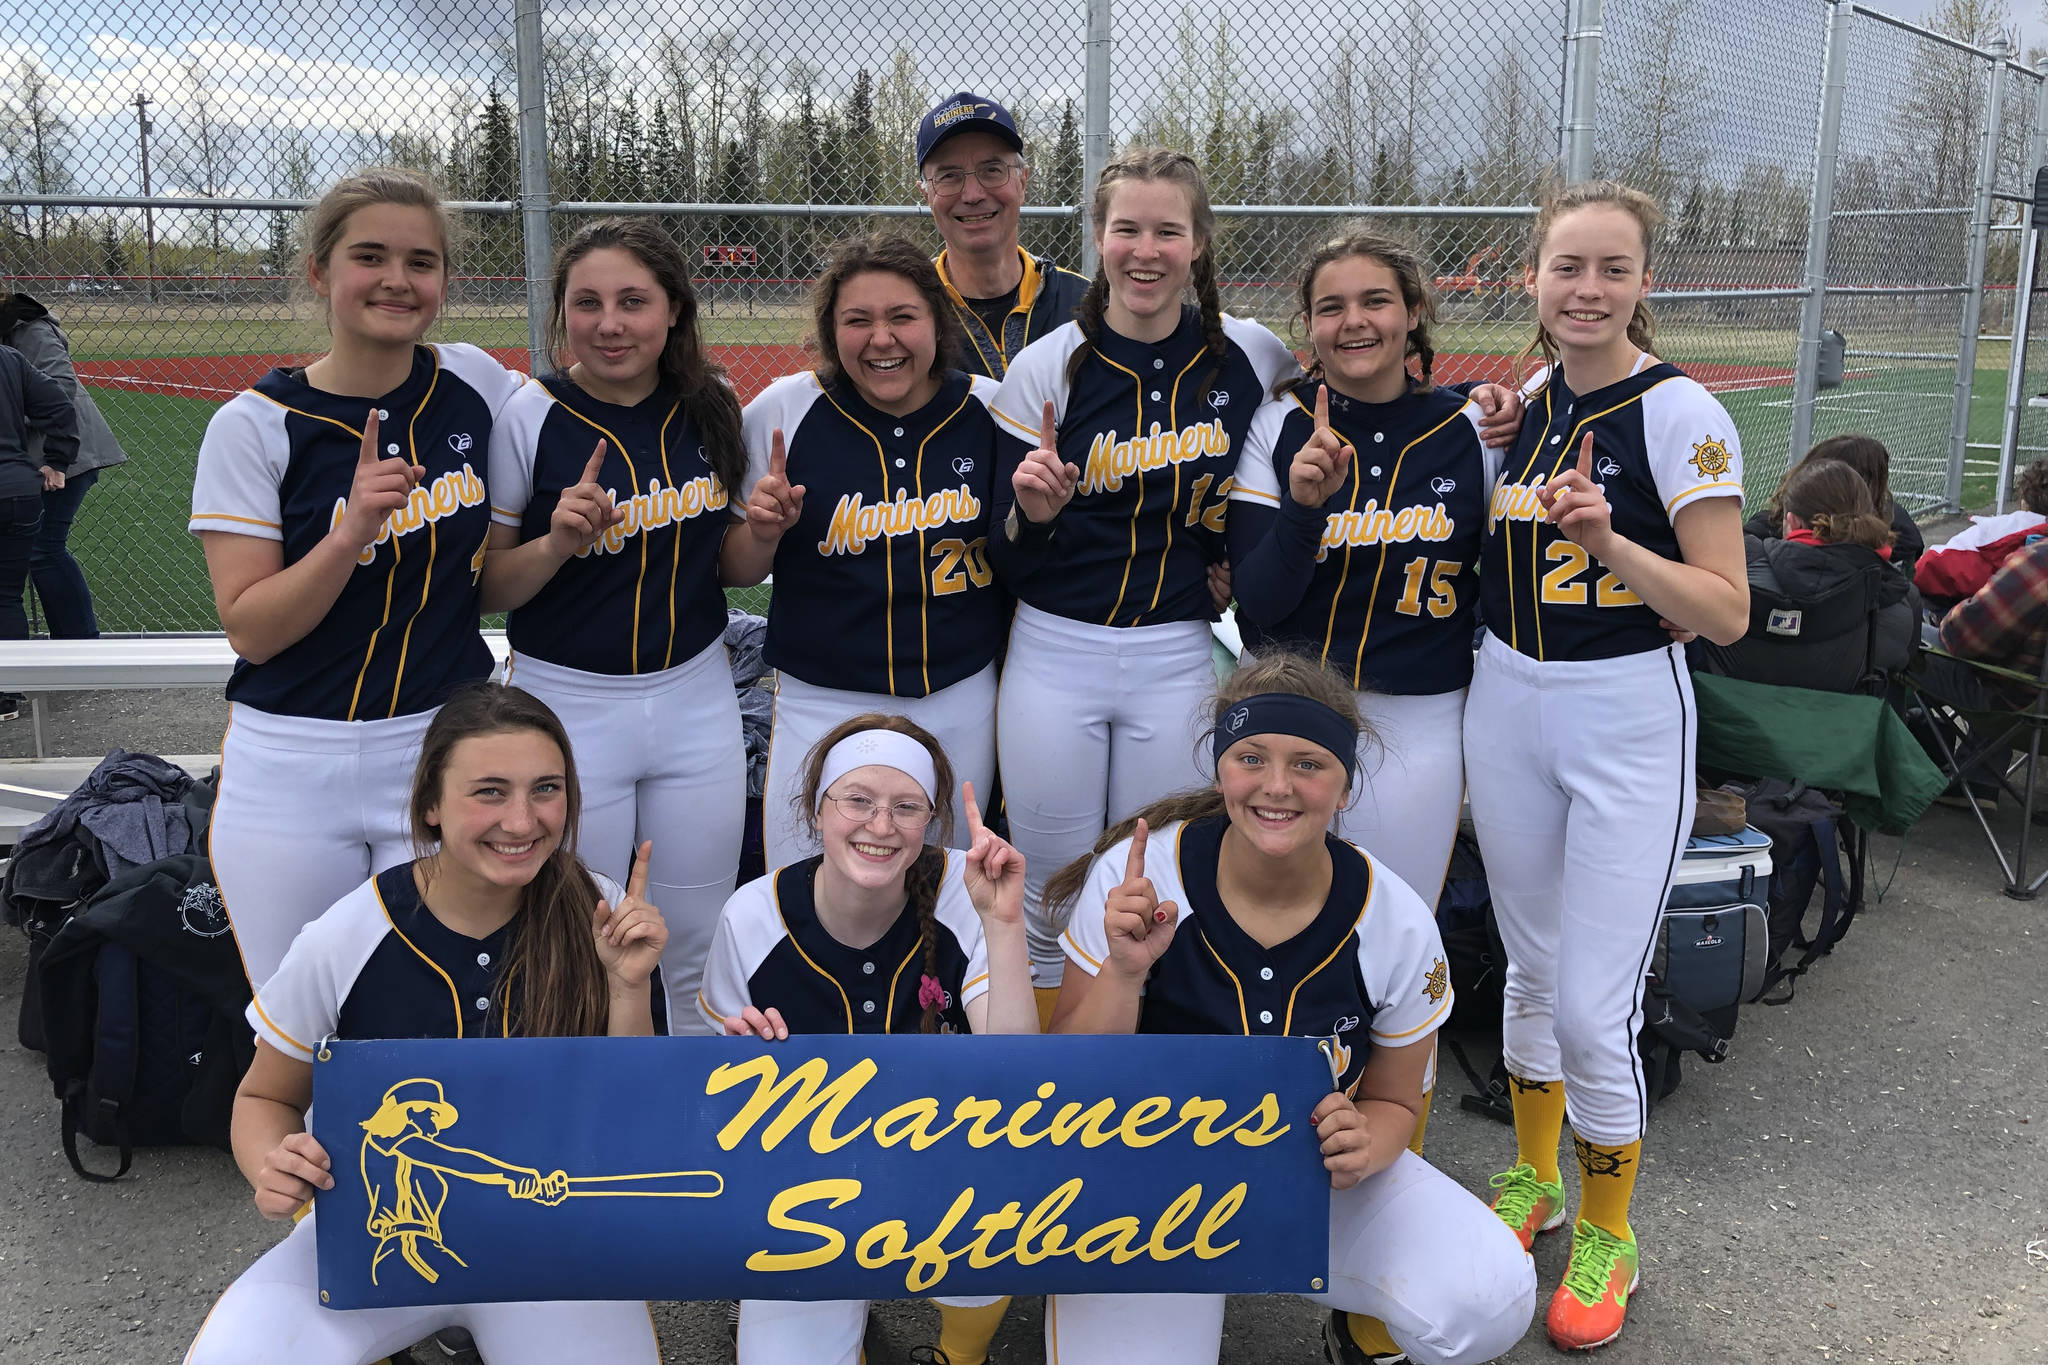 The Homer Mariners softball team poses for a photo with Coach Bill Bell, center, on May 4, 2019, after winning the Rally in the Valley softball tournament last weekend at Redington High School, Wasilla, Alaska. (Photo provided)